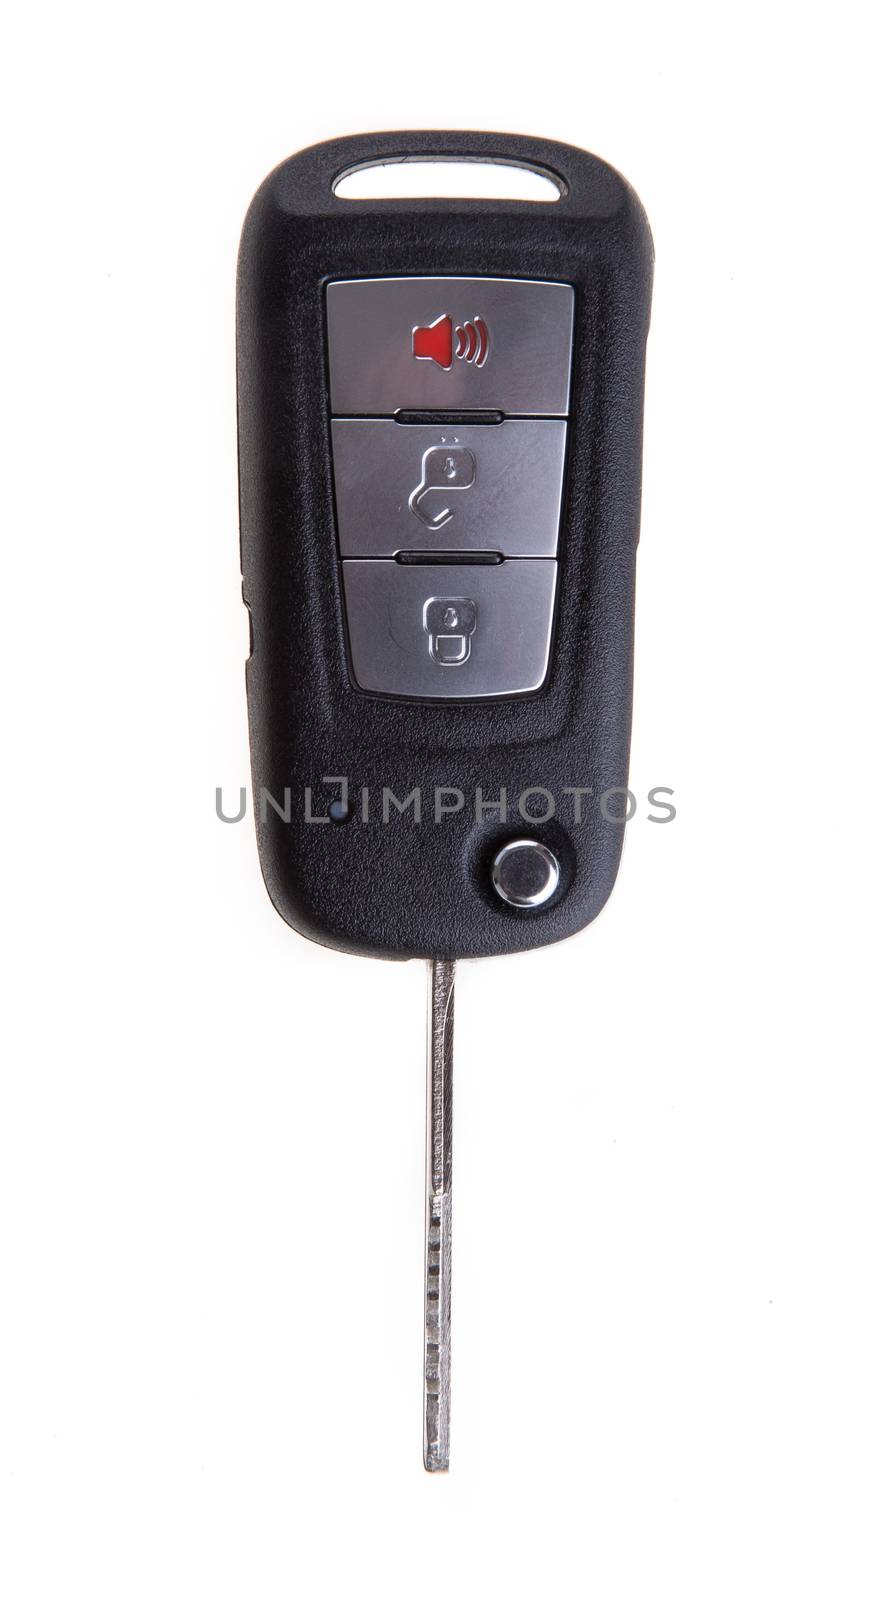 car key remote control isolated on white background